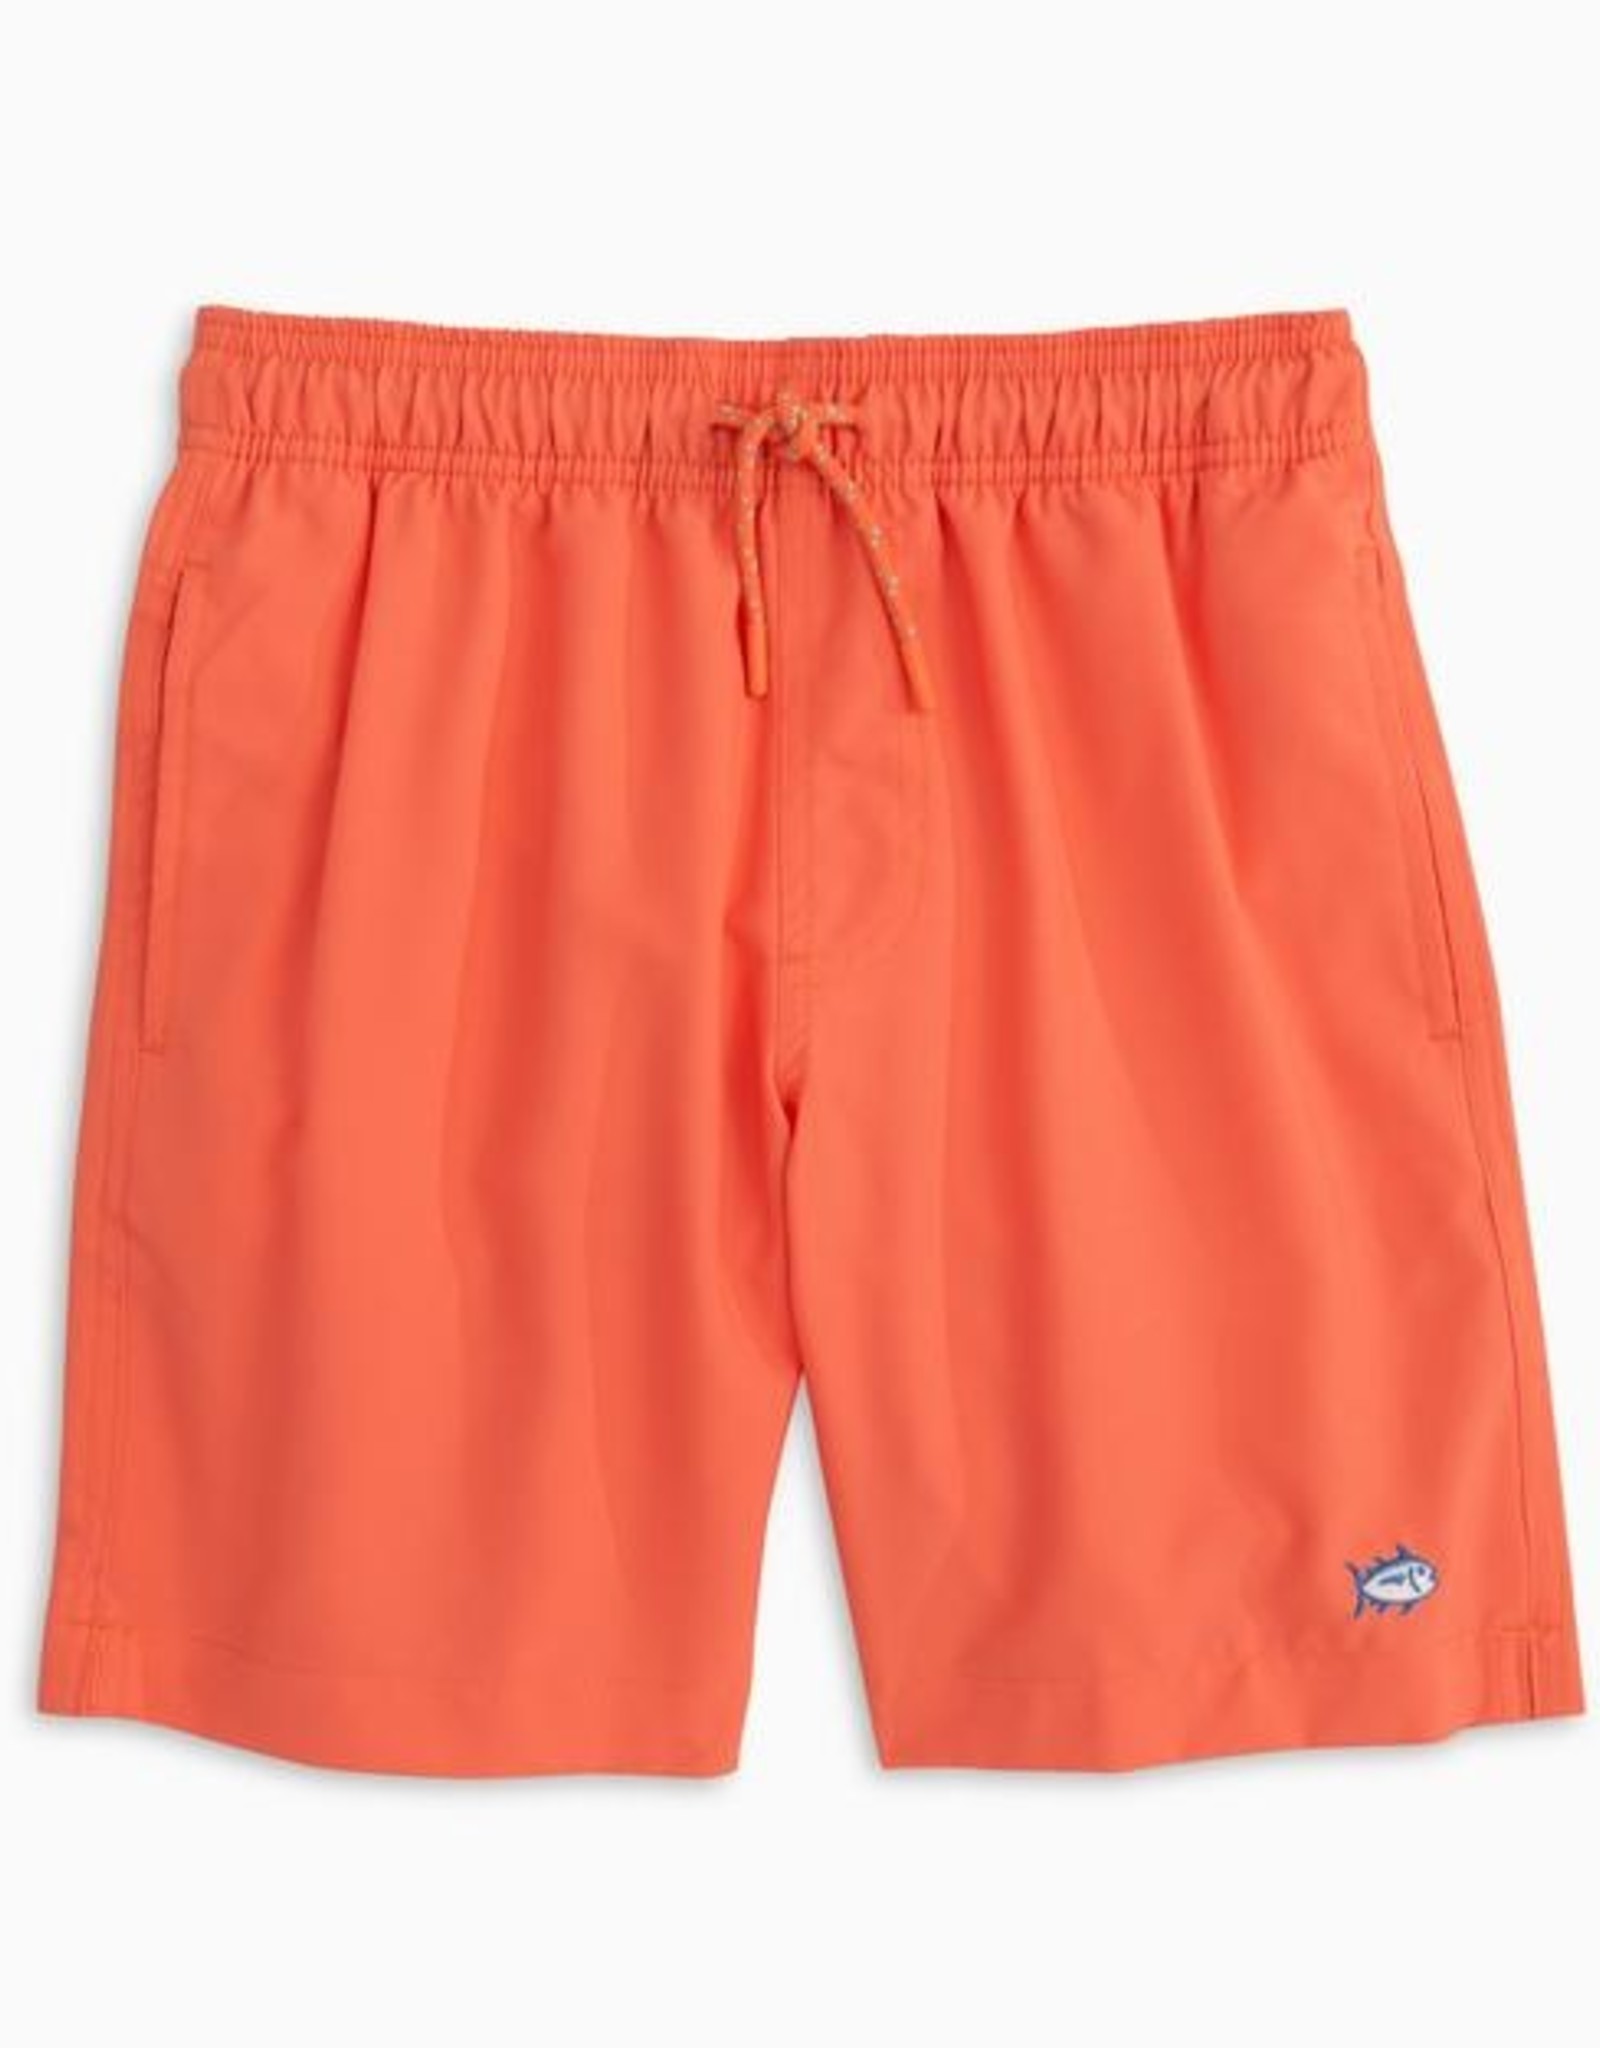 Southern Tide Youth Boys Solid Swim Trunks 